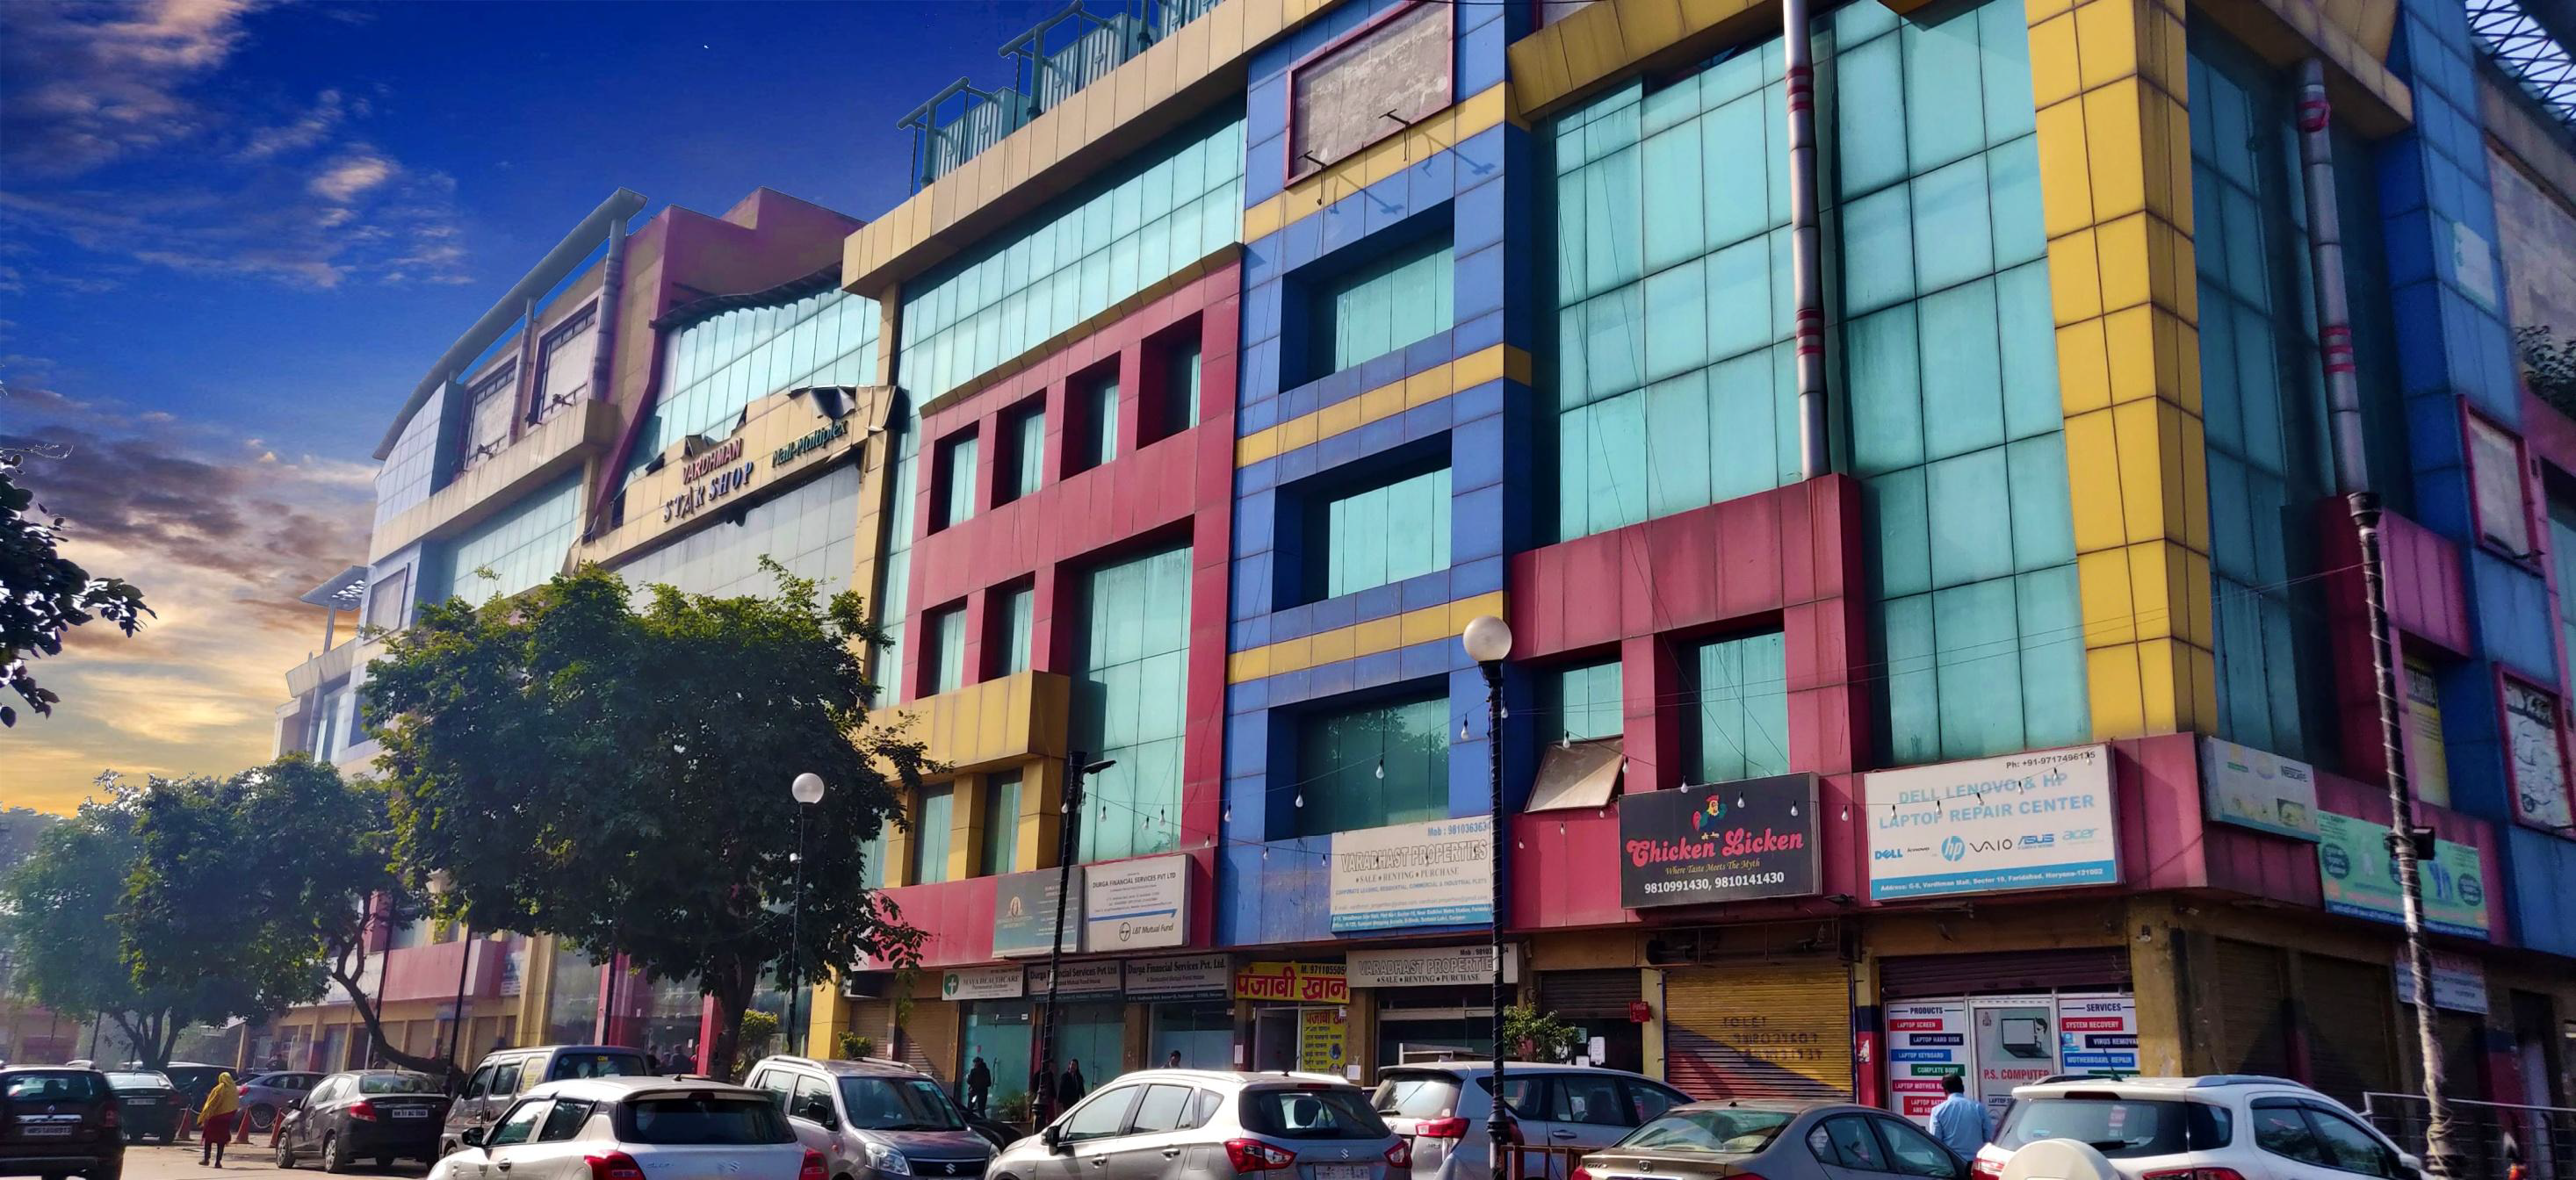 Commercial property for sale in India